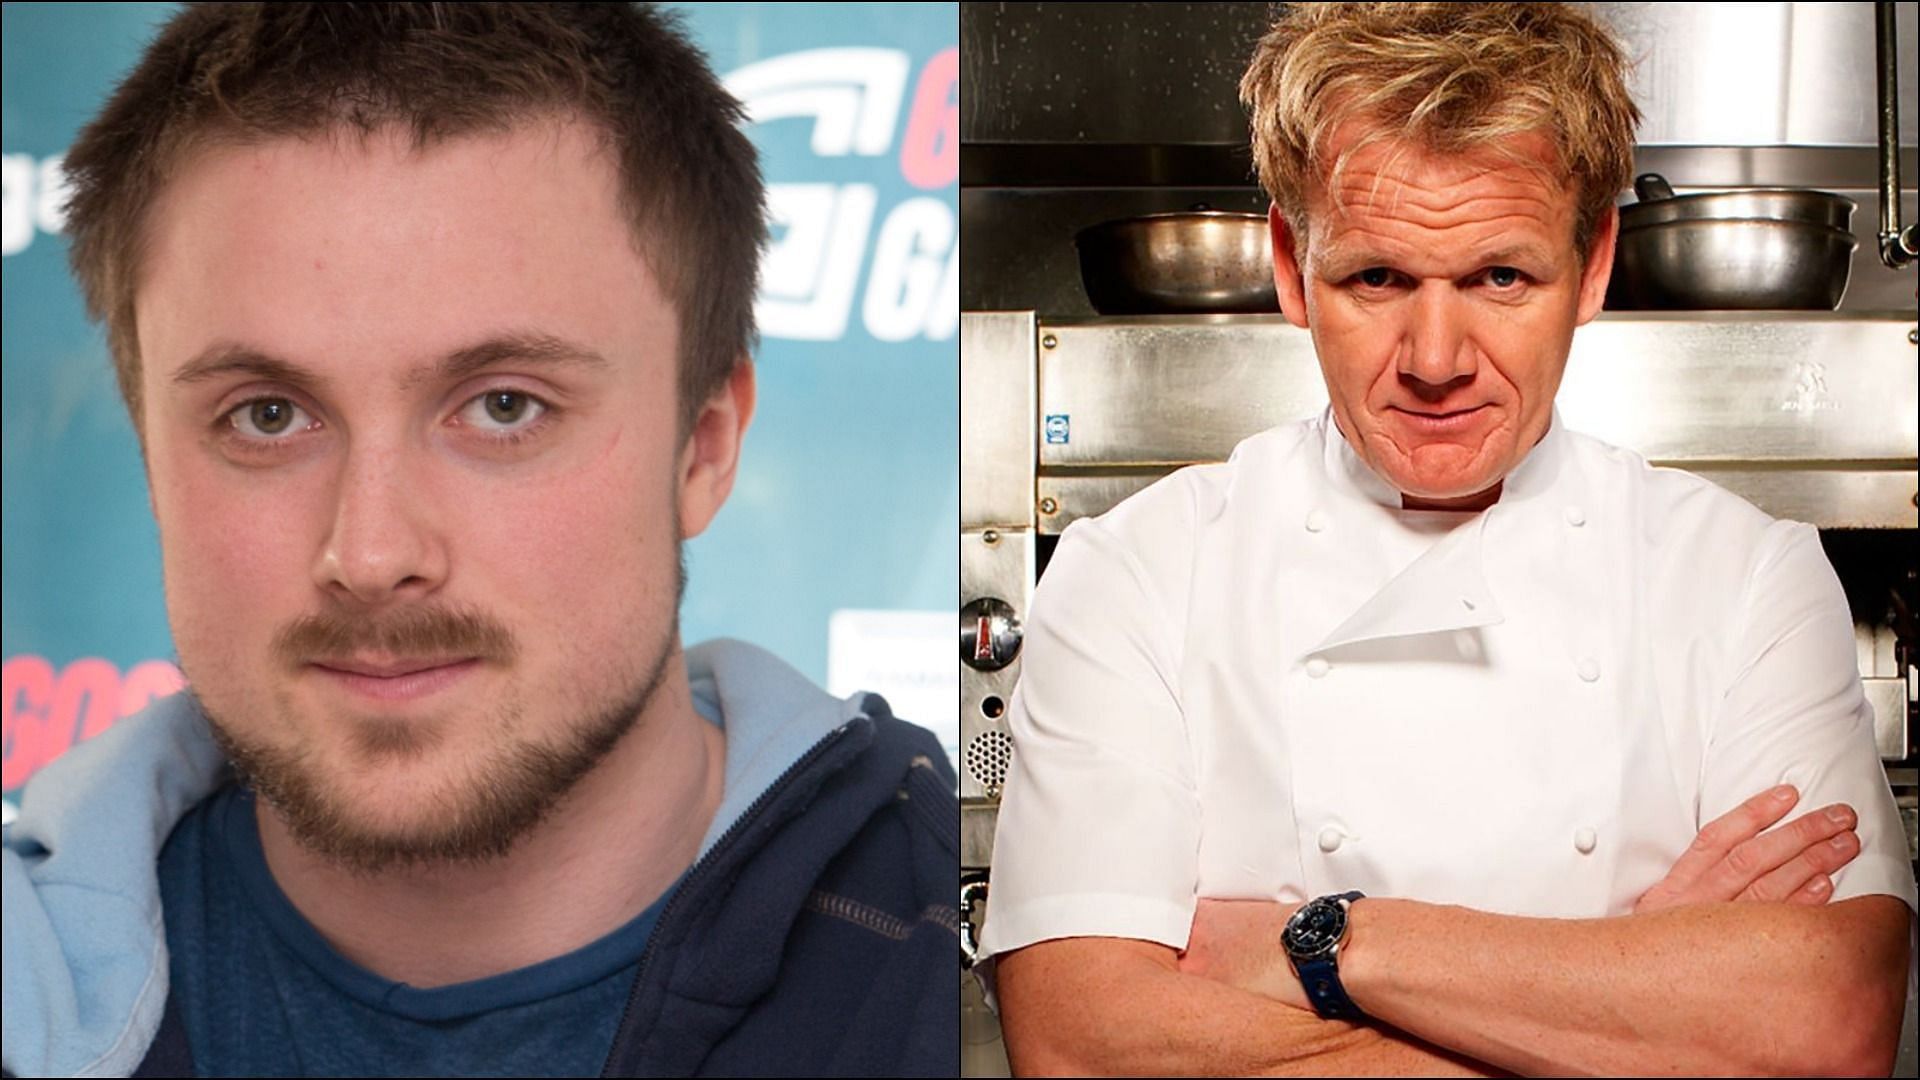 Twitch streamer Forsen throws caution to the wind and continues to react to Kitchen Nightmares after his chat informs him of the risks (Image via Sportskeeda)